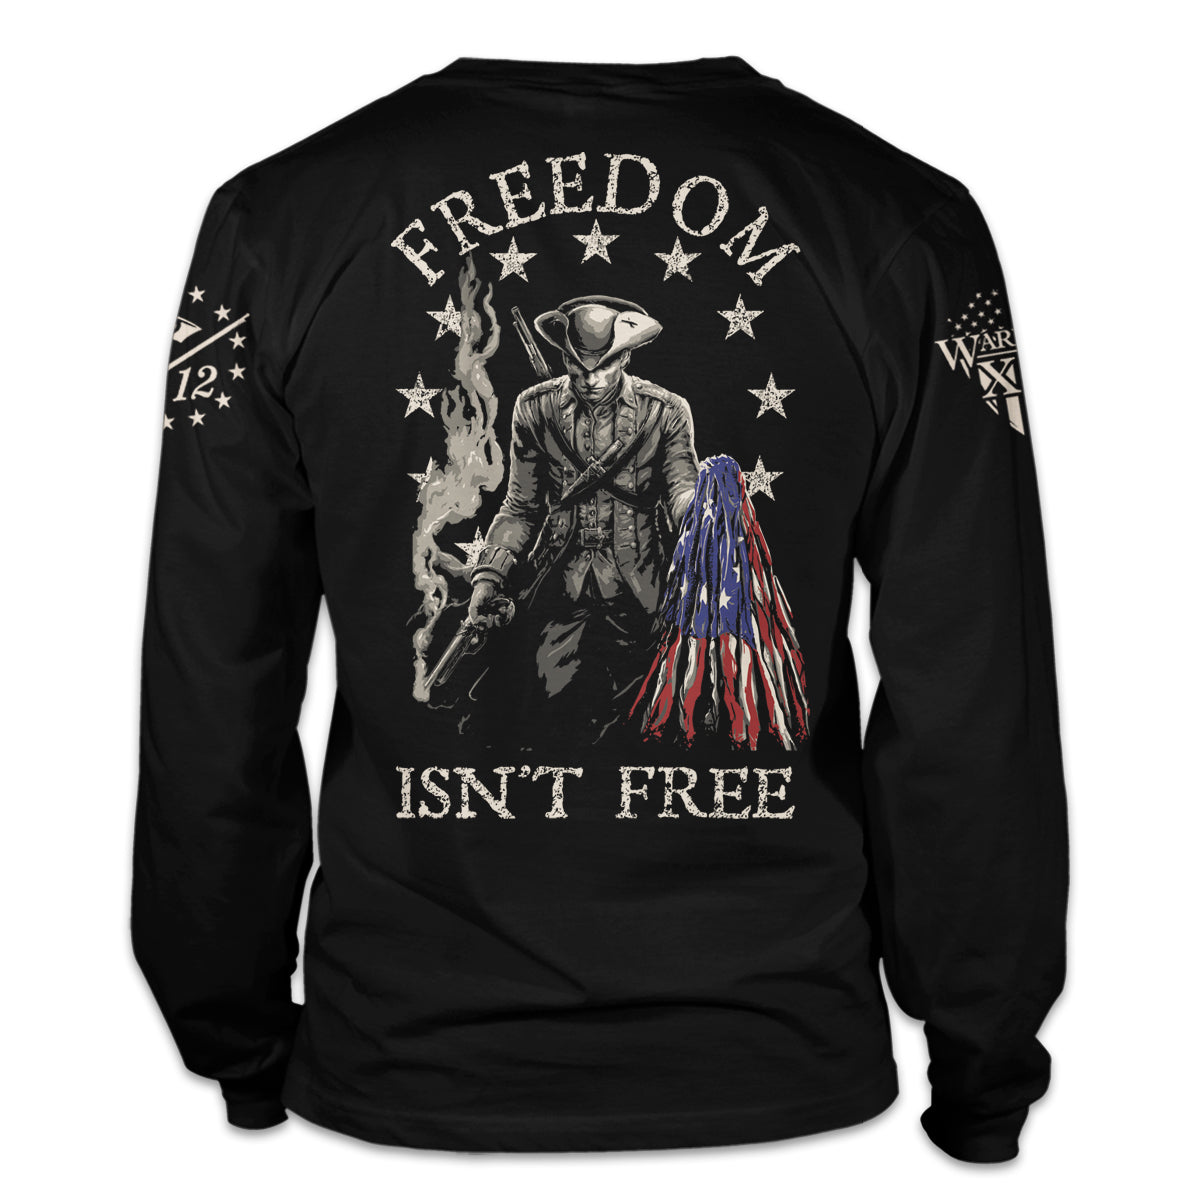 A black long sleeve shirt pays tribute to the Minuteman, the original American Patriot, and our forefathers who fought relentlessly against the tyranny of Britain.The back of the shirt has an infaltry soldier holding a ripped USA flag printed on it.